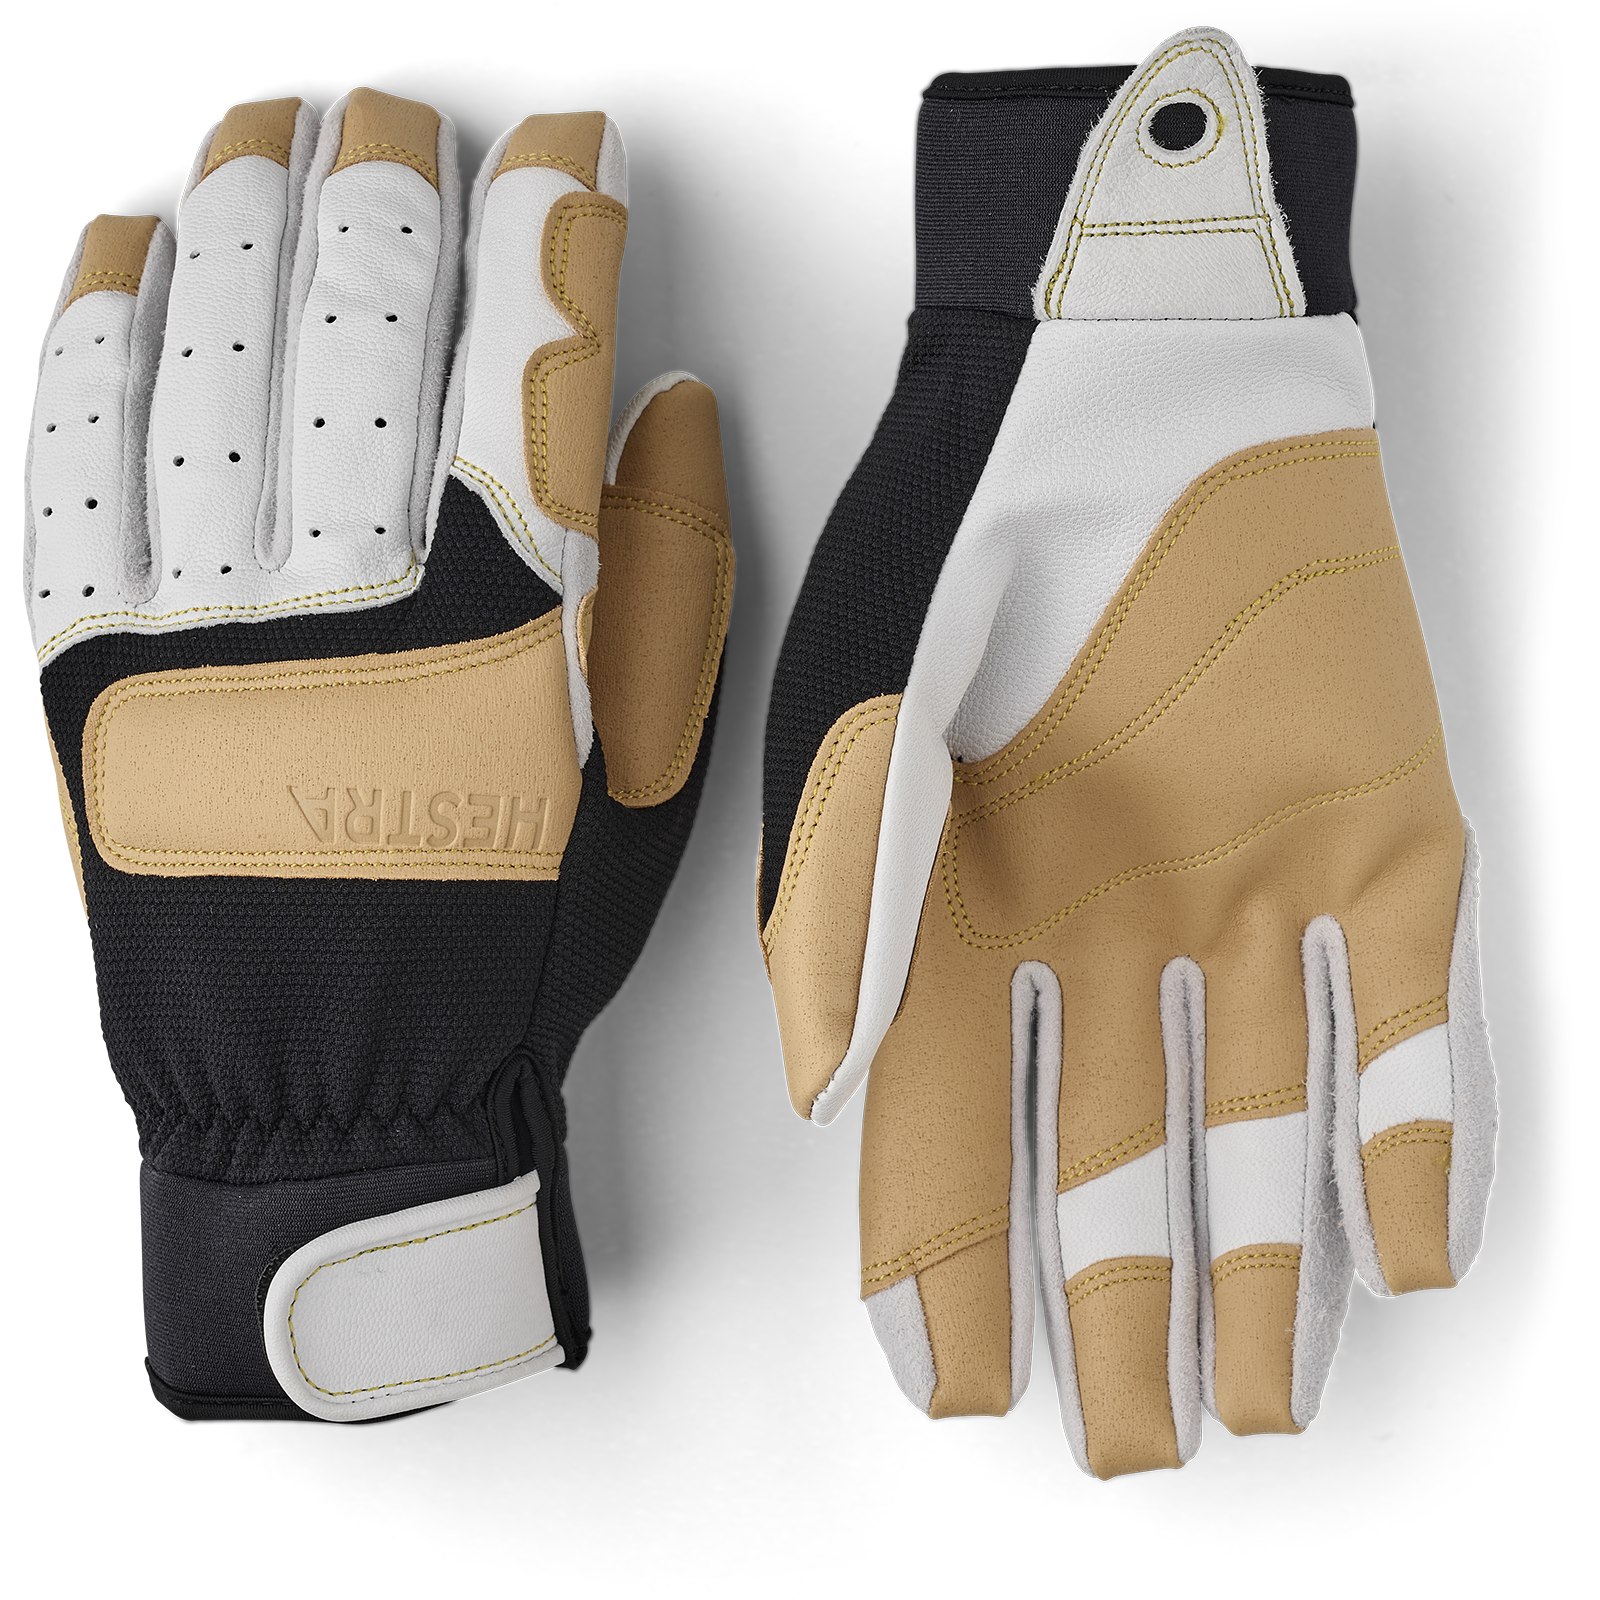 Picture of Hestra Climbers Long - 5 Finger Gloves - offwhite / black